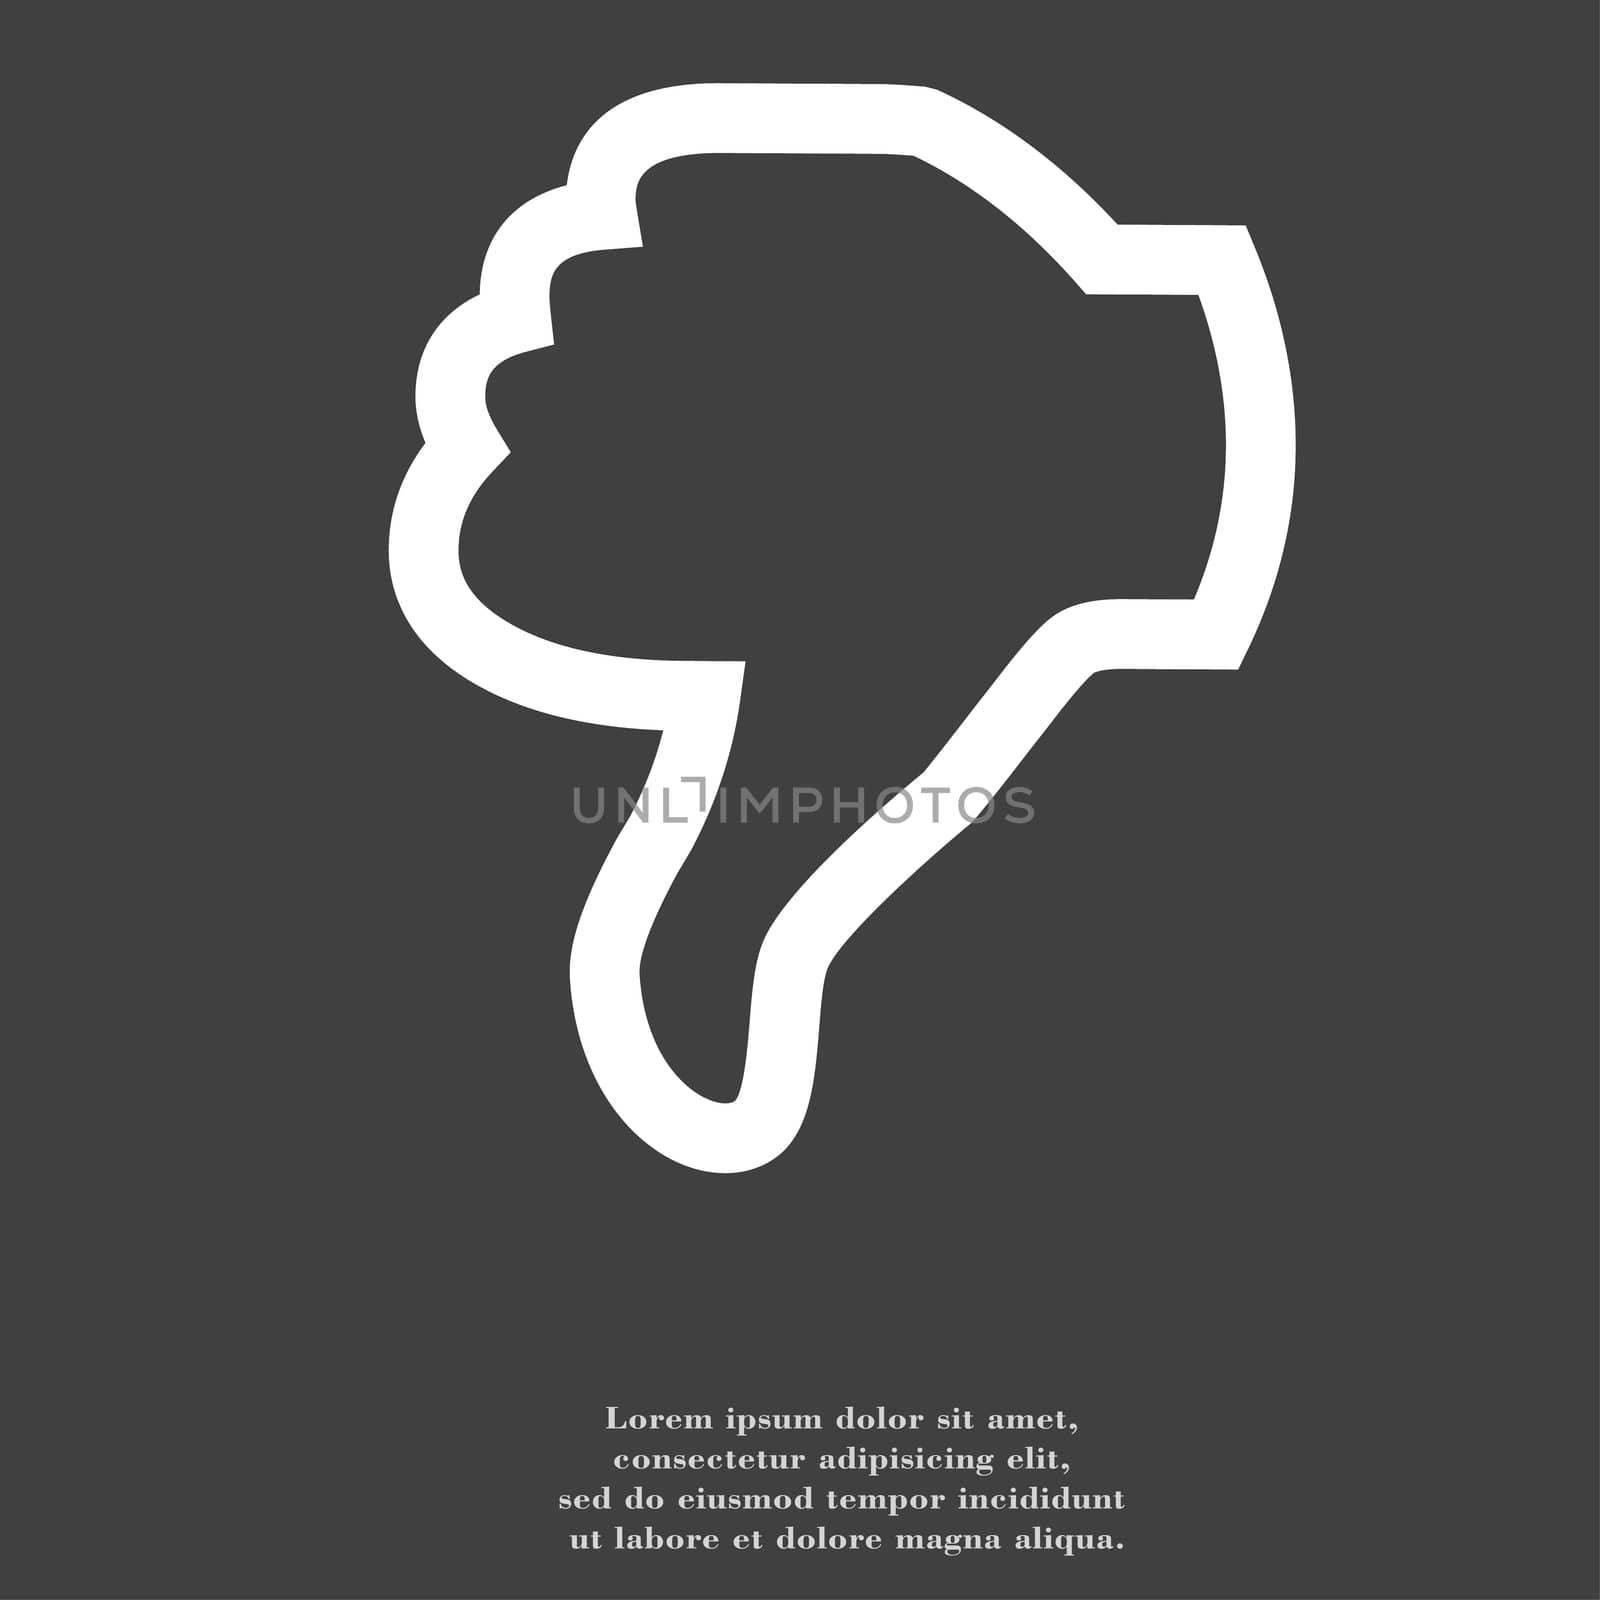 Dislike, Thumb down icon symbol Flat modern web design with long shadow and space for your text. illustration